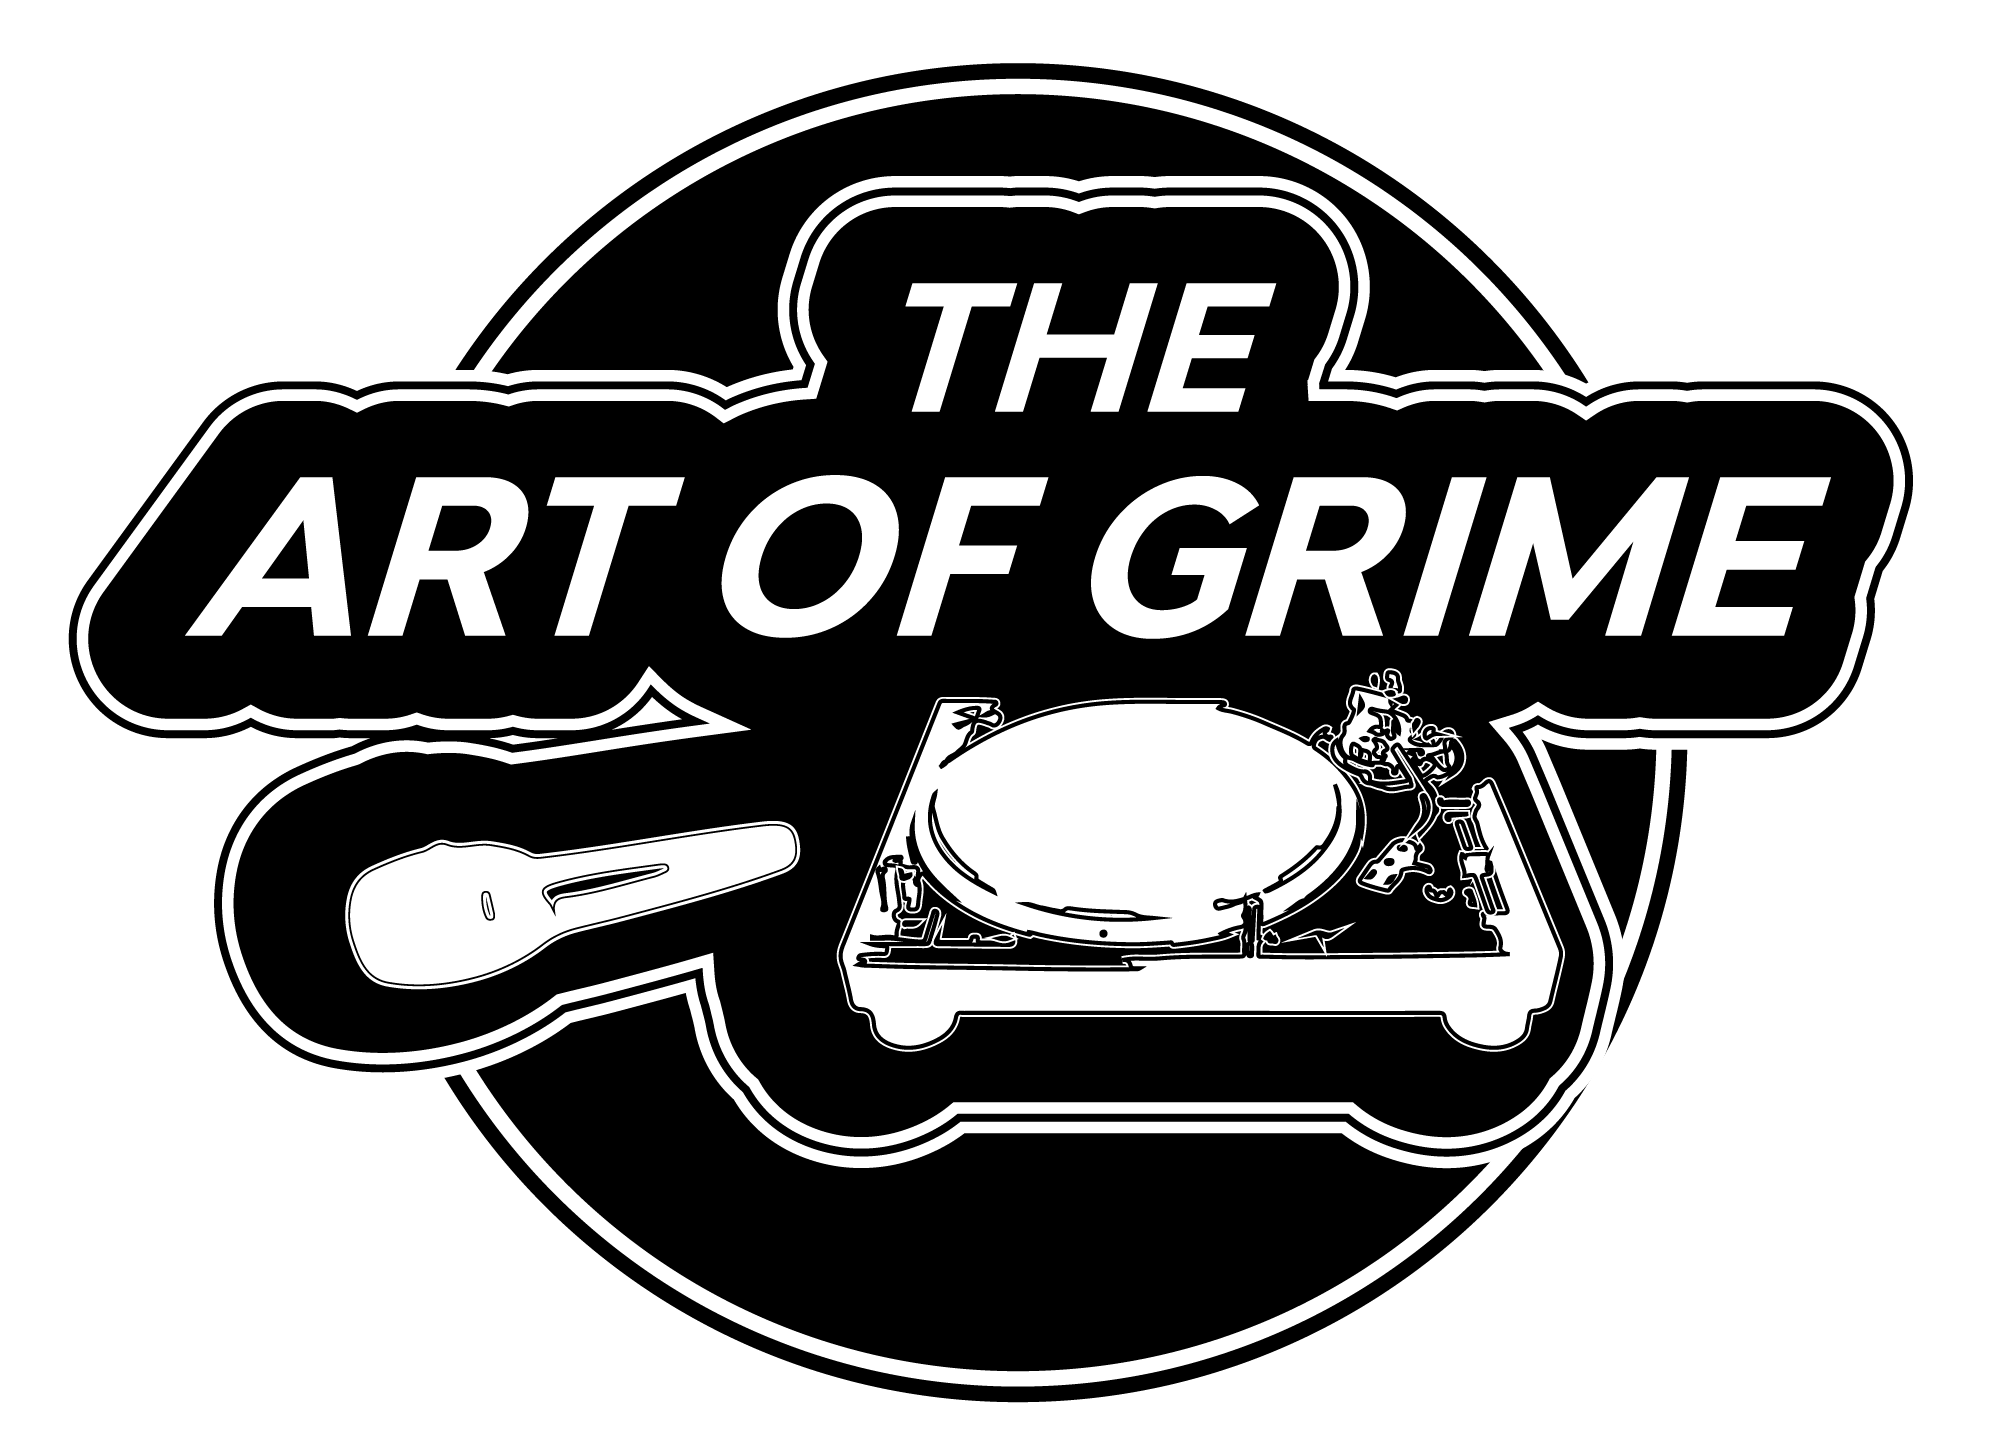 The Art of Grime